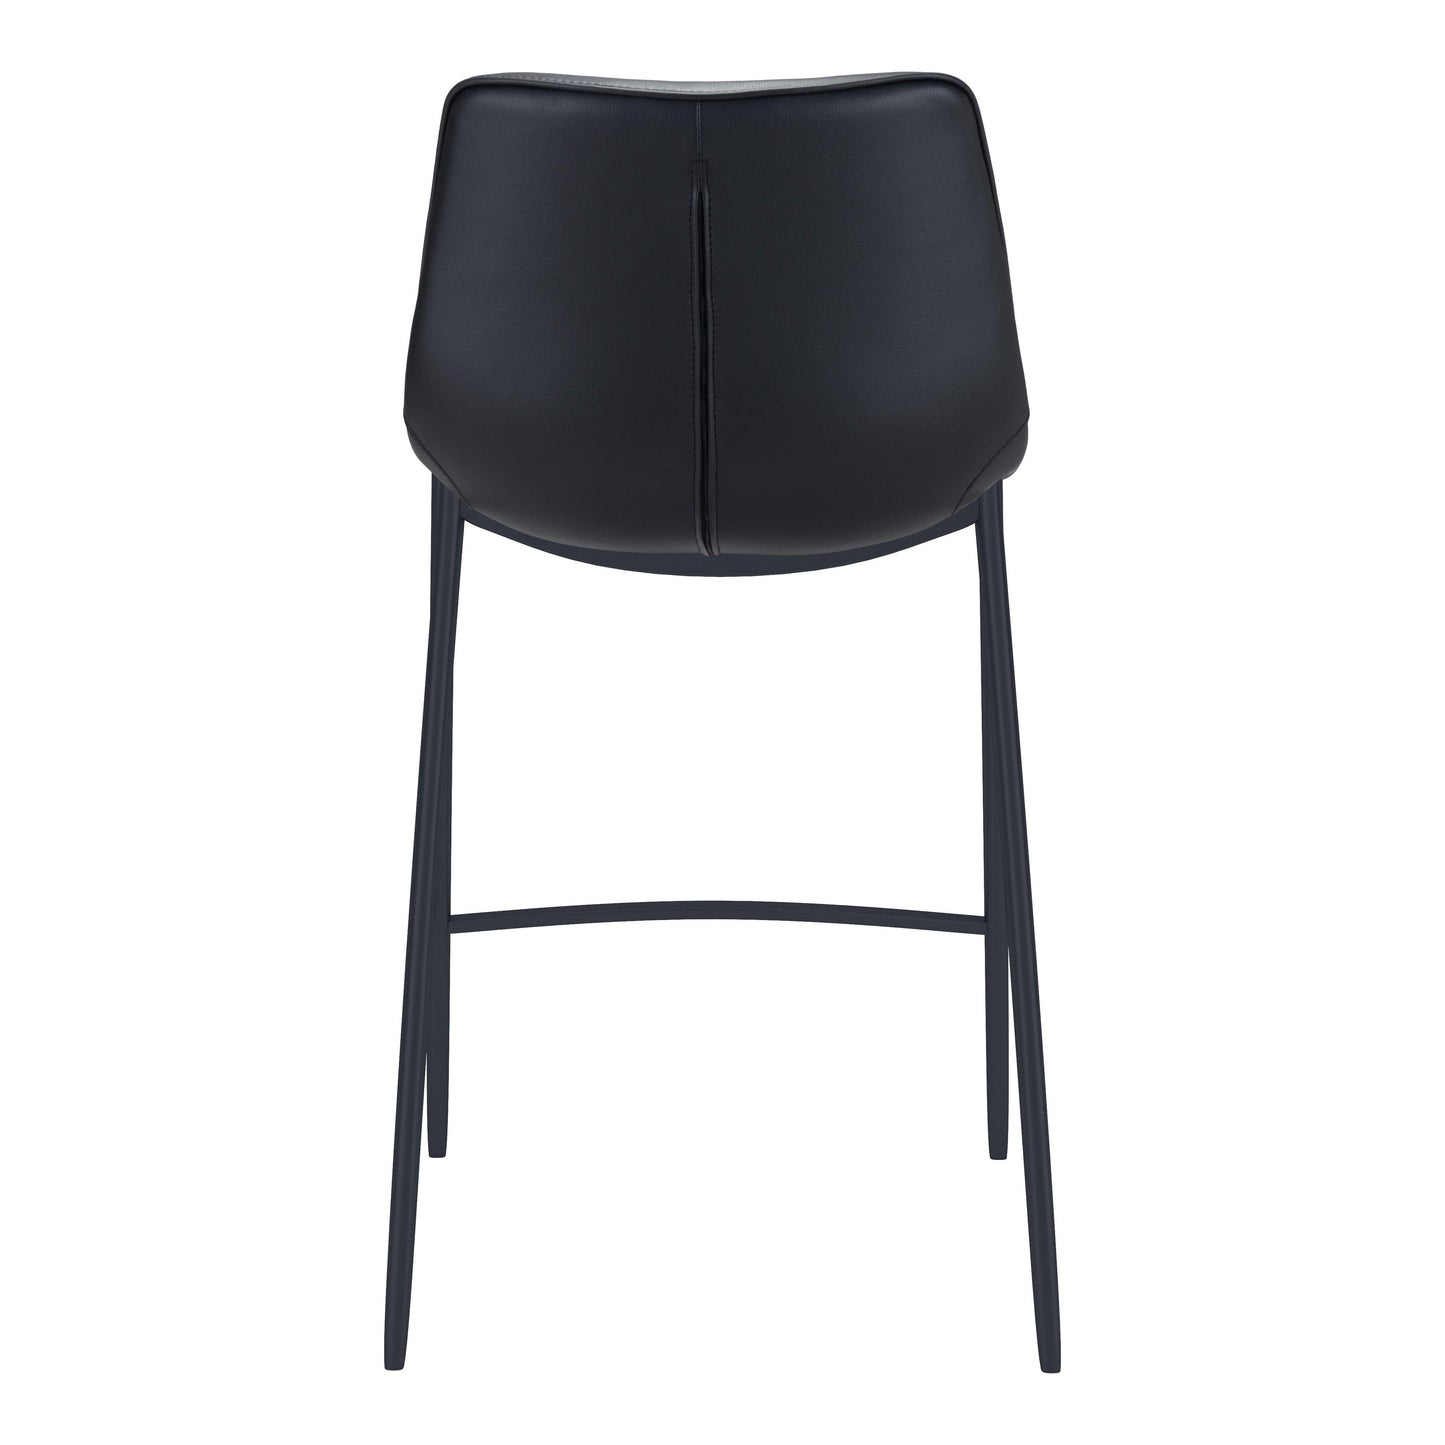 Magnus Bar Chair (Set of 2) Black - Sideboards and Things Accents_Black, Back Type_Full Back, Back Type_With Back, Brand_Zuo Modern, Color_Black, Depth_20-30, Finish_Powder Coated, Height_40-50, Materials_Metal, Materials_Upholstery, Metal Type_Steel, Number of Pieces_2PC Set, Product Type_Bar Height, Shape_Armless, Upholstery Type_Fabric Blend, Upholstery Type_Leather, Upholstery Type_Polyester, Upholstery Type_Vegan Leather, Width_20-30